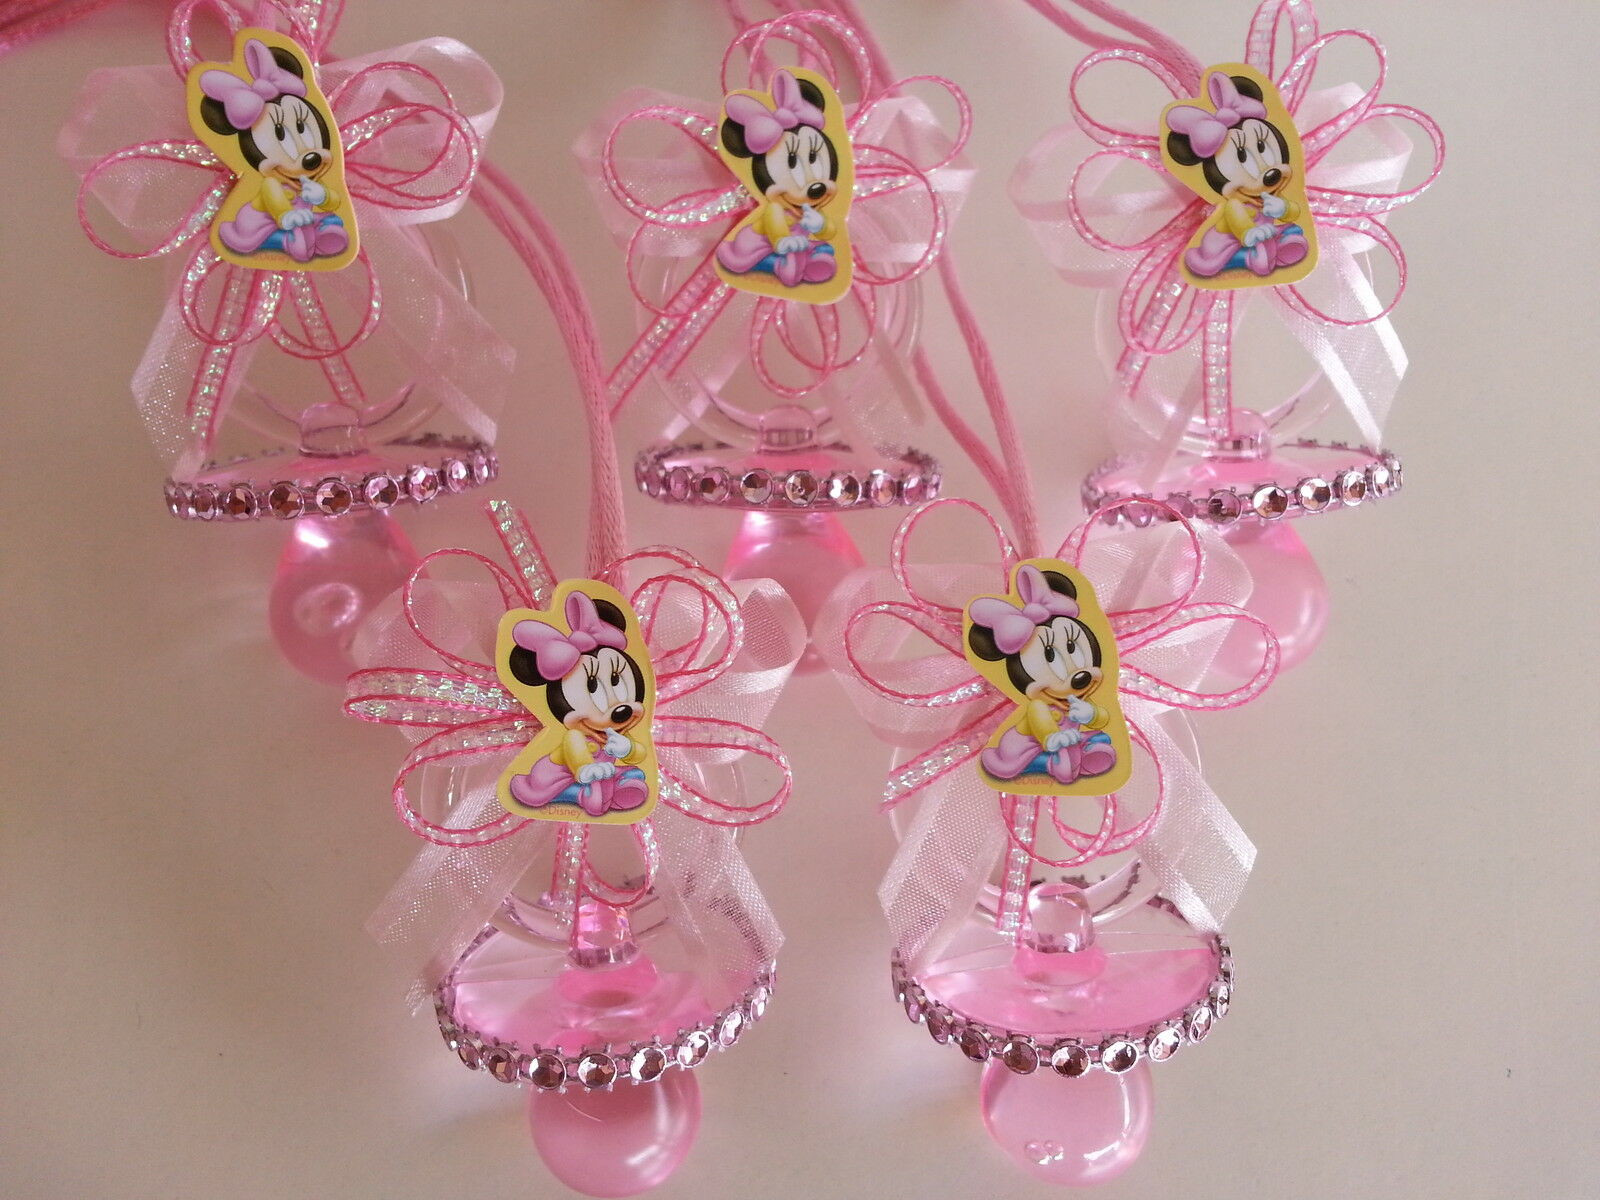 Minnie Mouse Baby Shower Decorations Ideas
 Minnie Mouse Centerpiece Bottle 14" Baby Shower